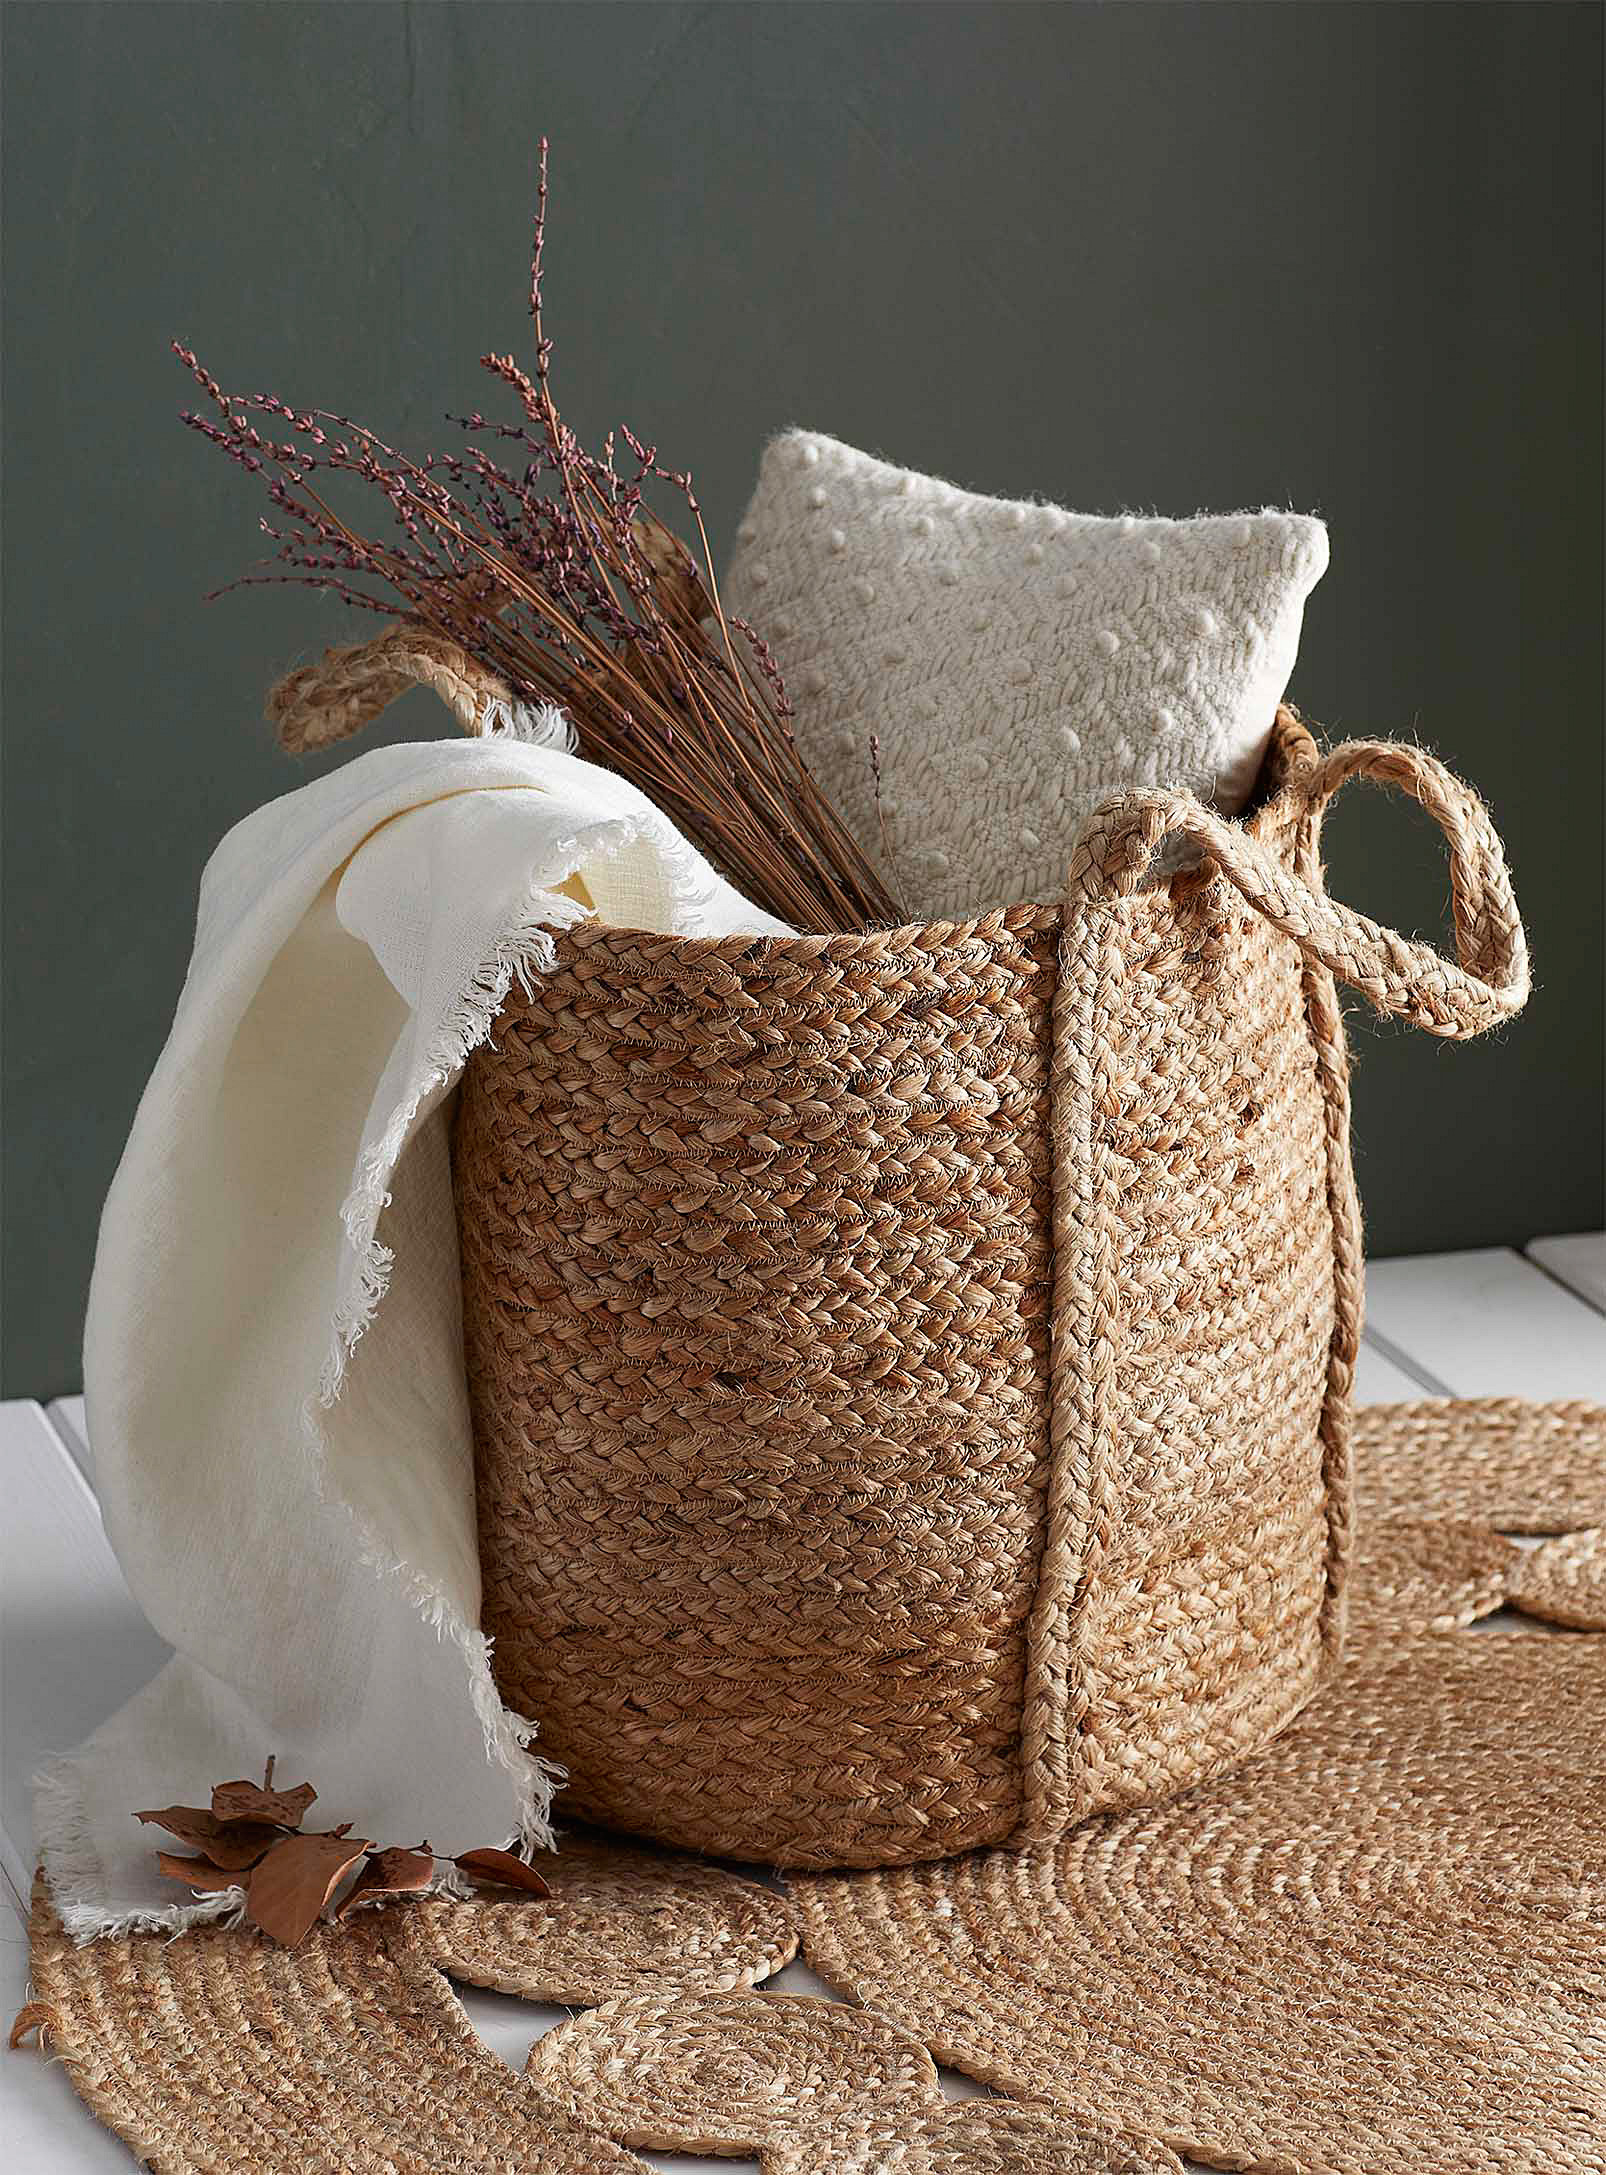 A large woven straw basket filled with blankets and pillows